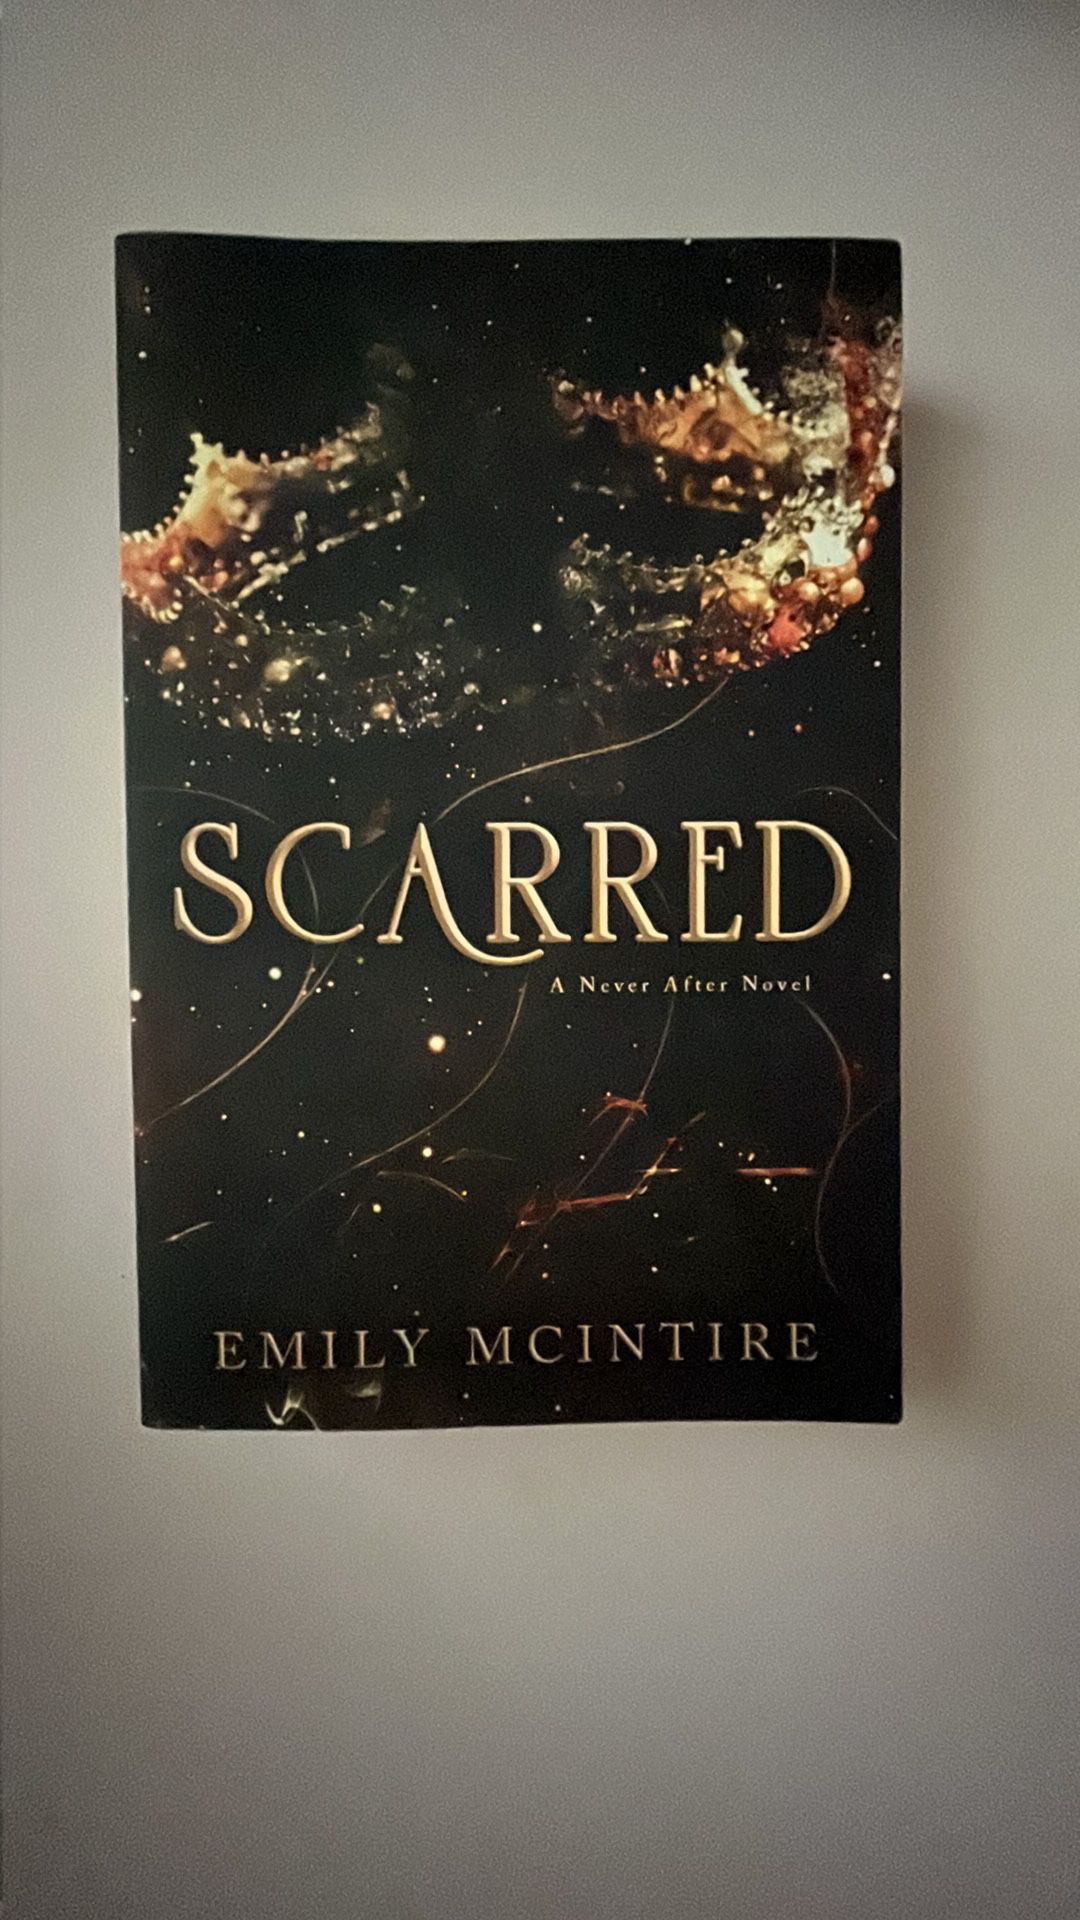 Scarred by Emily Mcintire